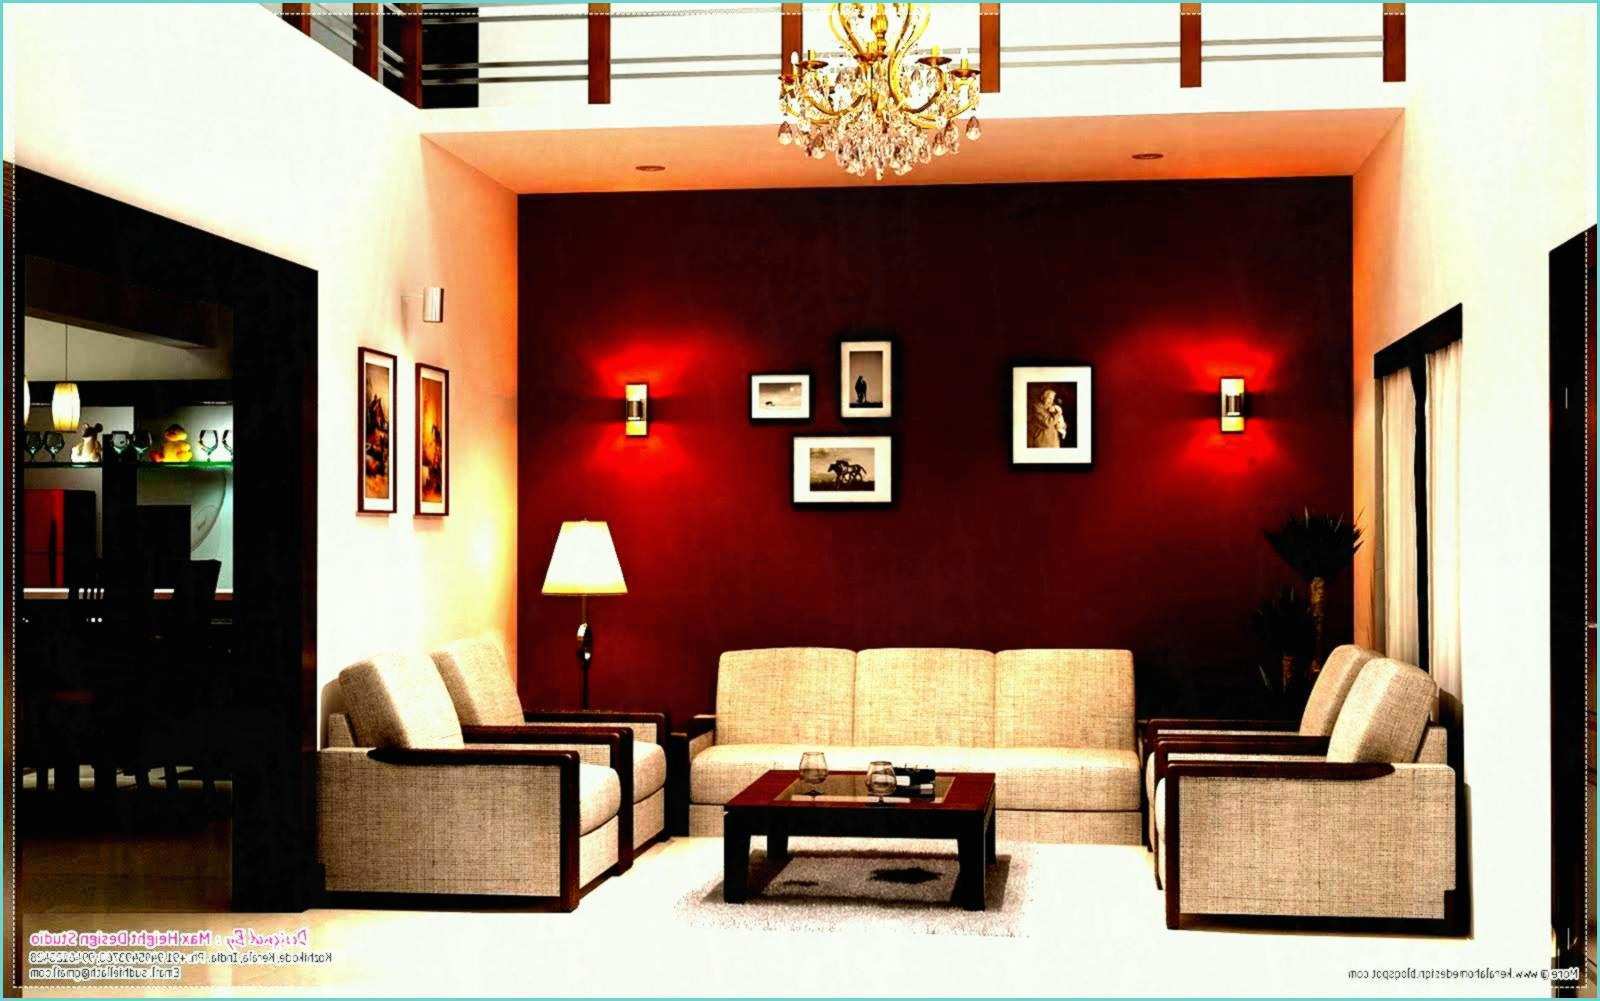 Design Ideas Amp Wall Showcase Designs for Living Room Indian Style Modern